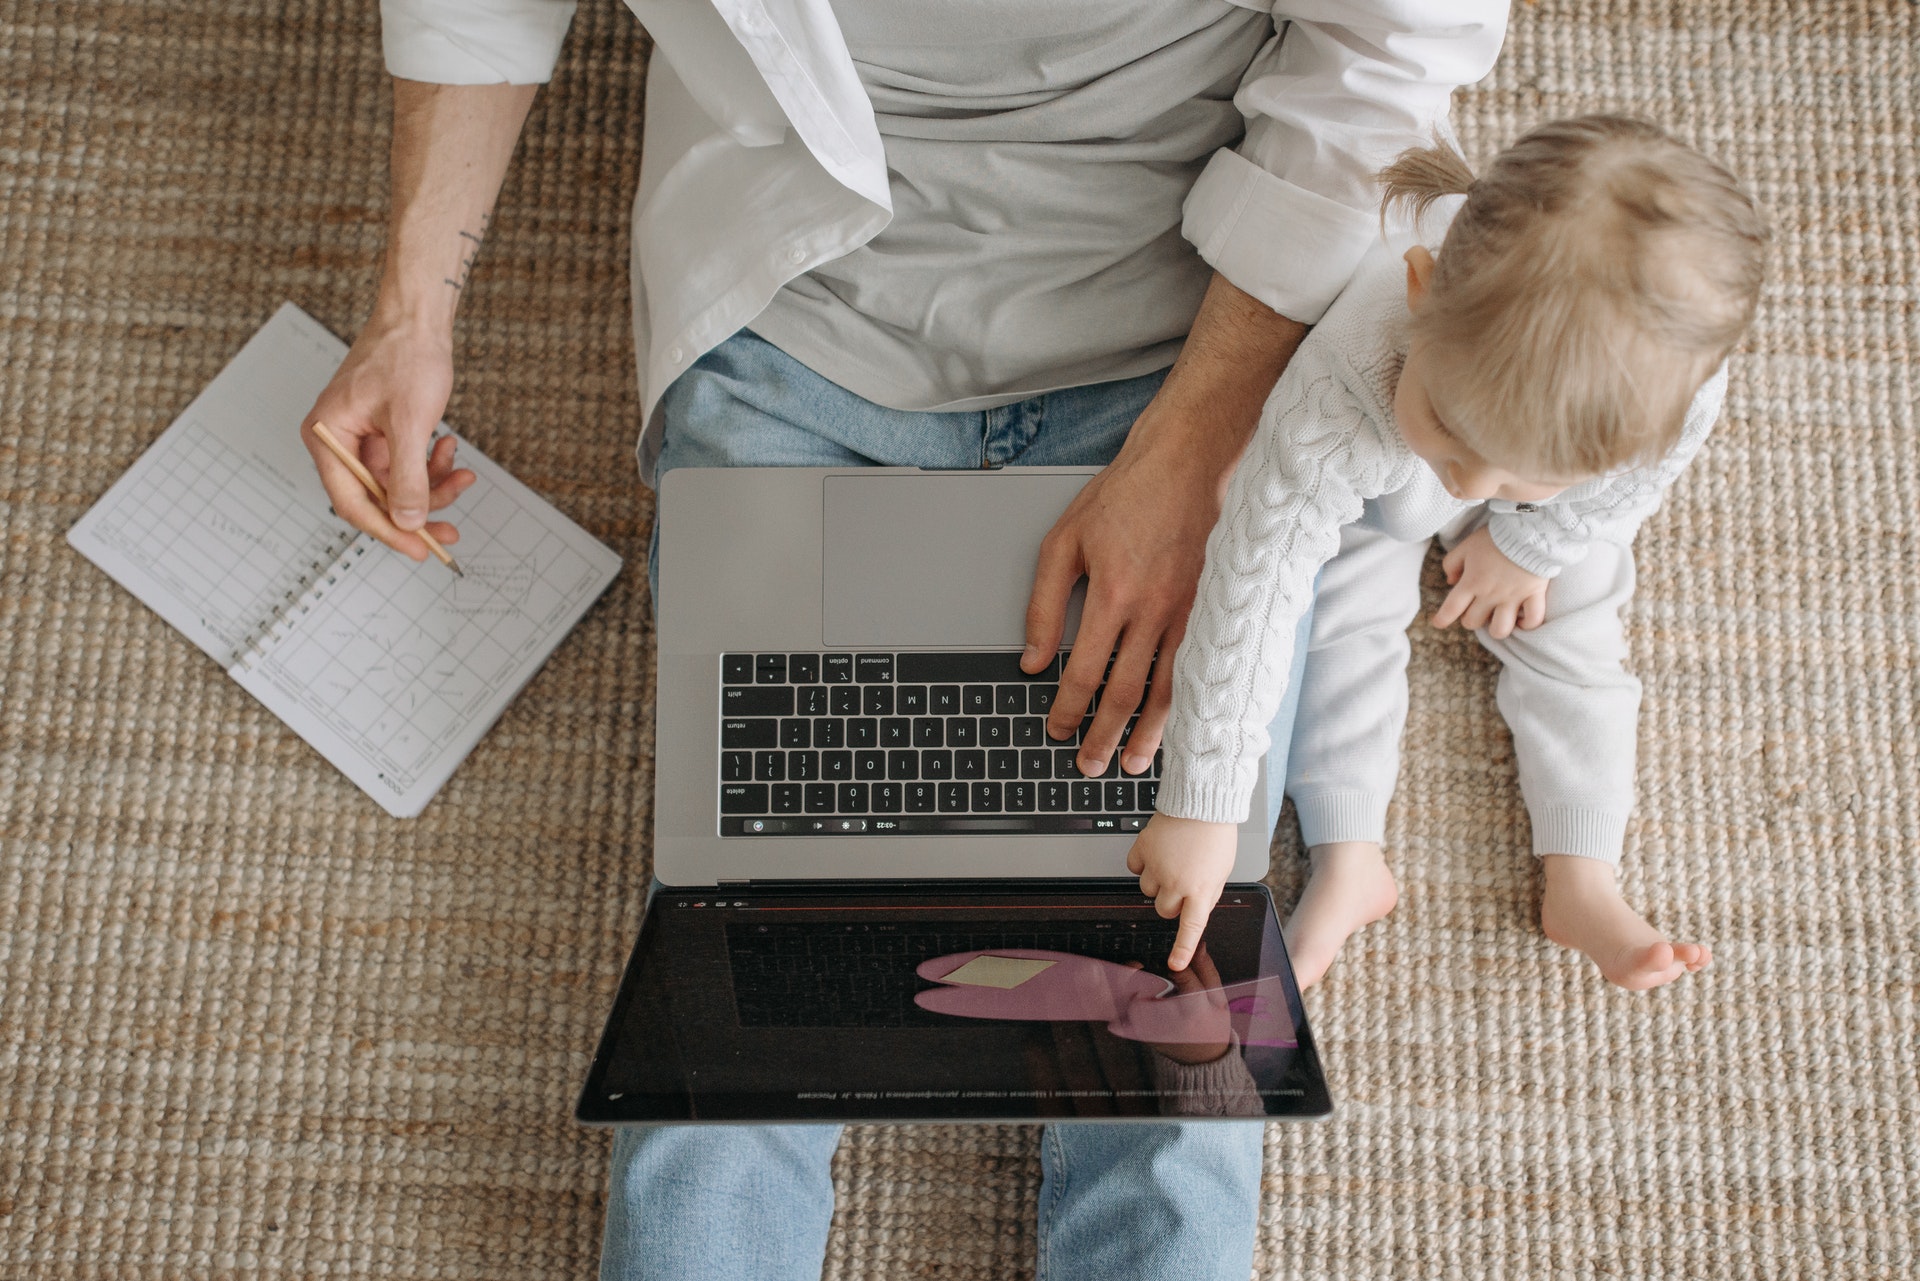 Working From Home With Kids: How To Balance Work And Take Care Of Your Children